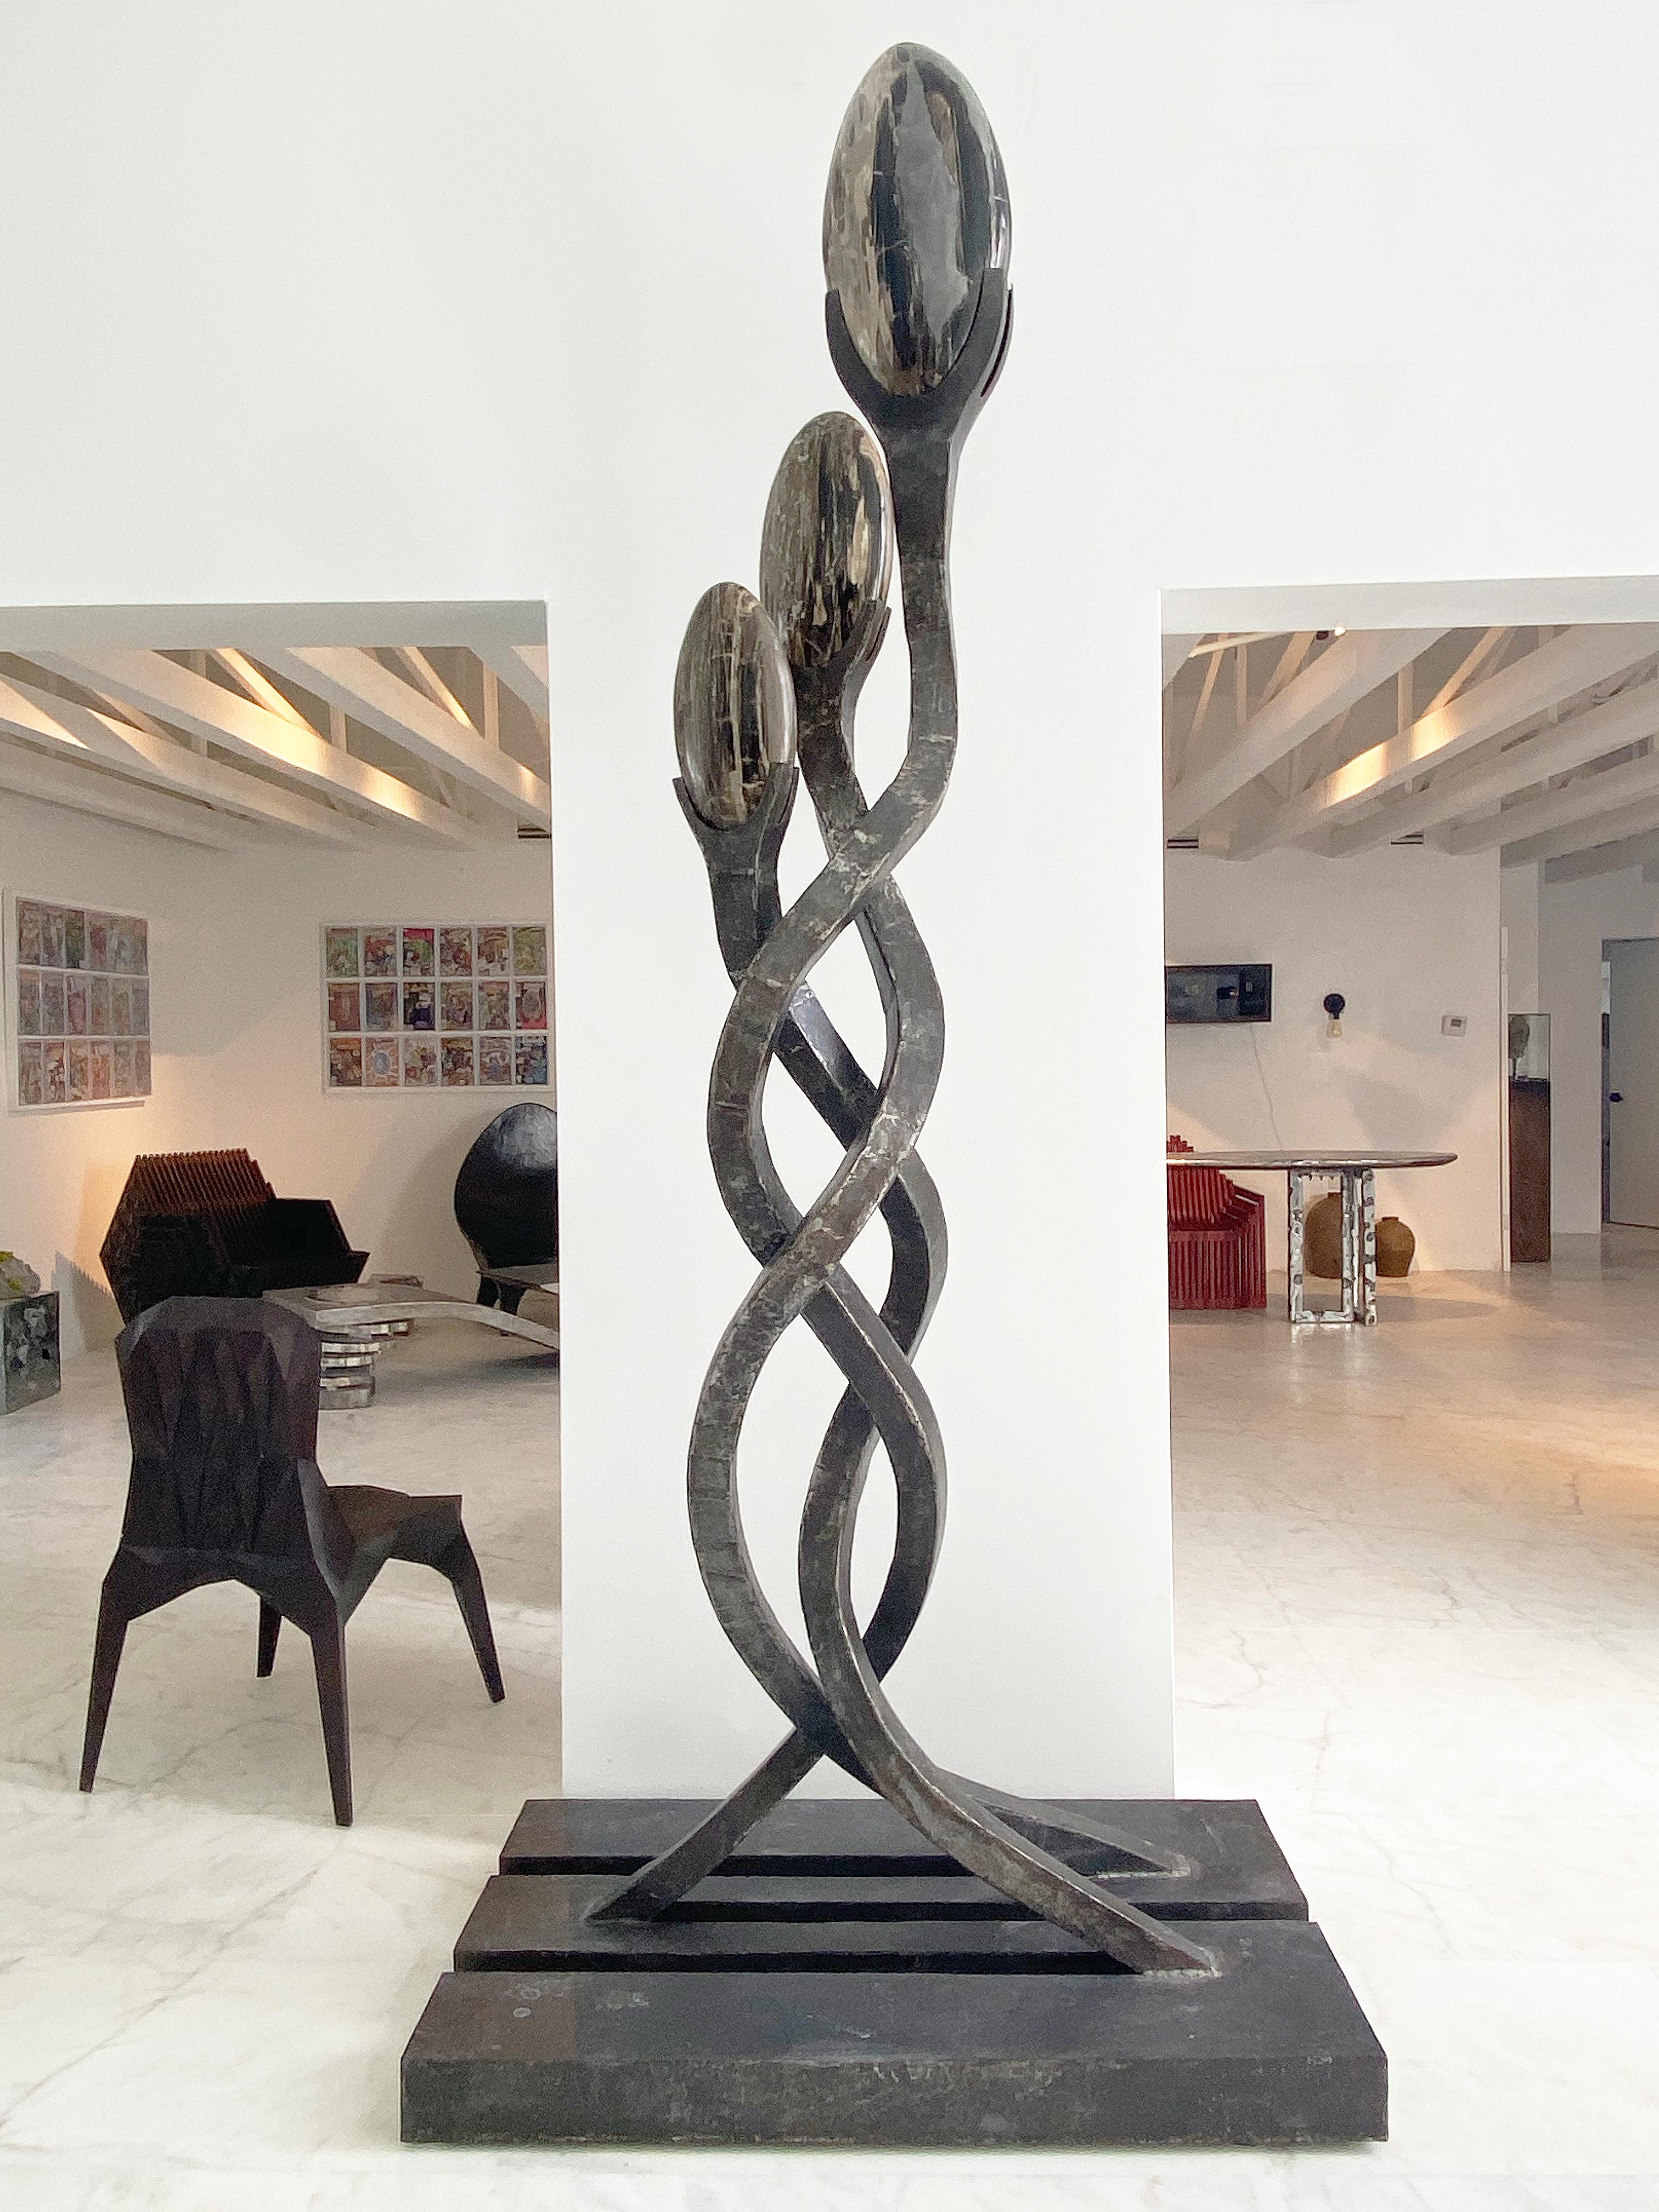 Inspired by a spiritual journey in the Peruvian Amazon, this sculpture depicts the elegant serpentine vines of the ayahuasca plant twisting toward the sky. A Quechua word meaning the 